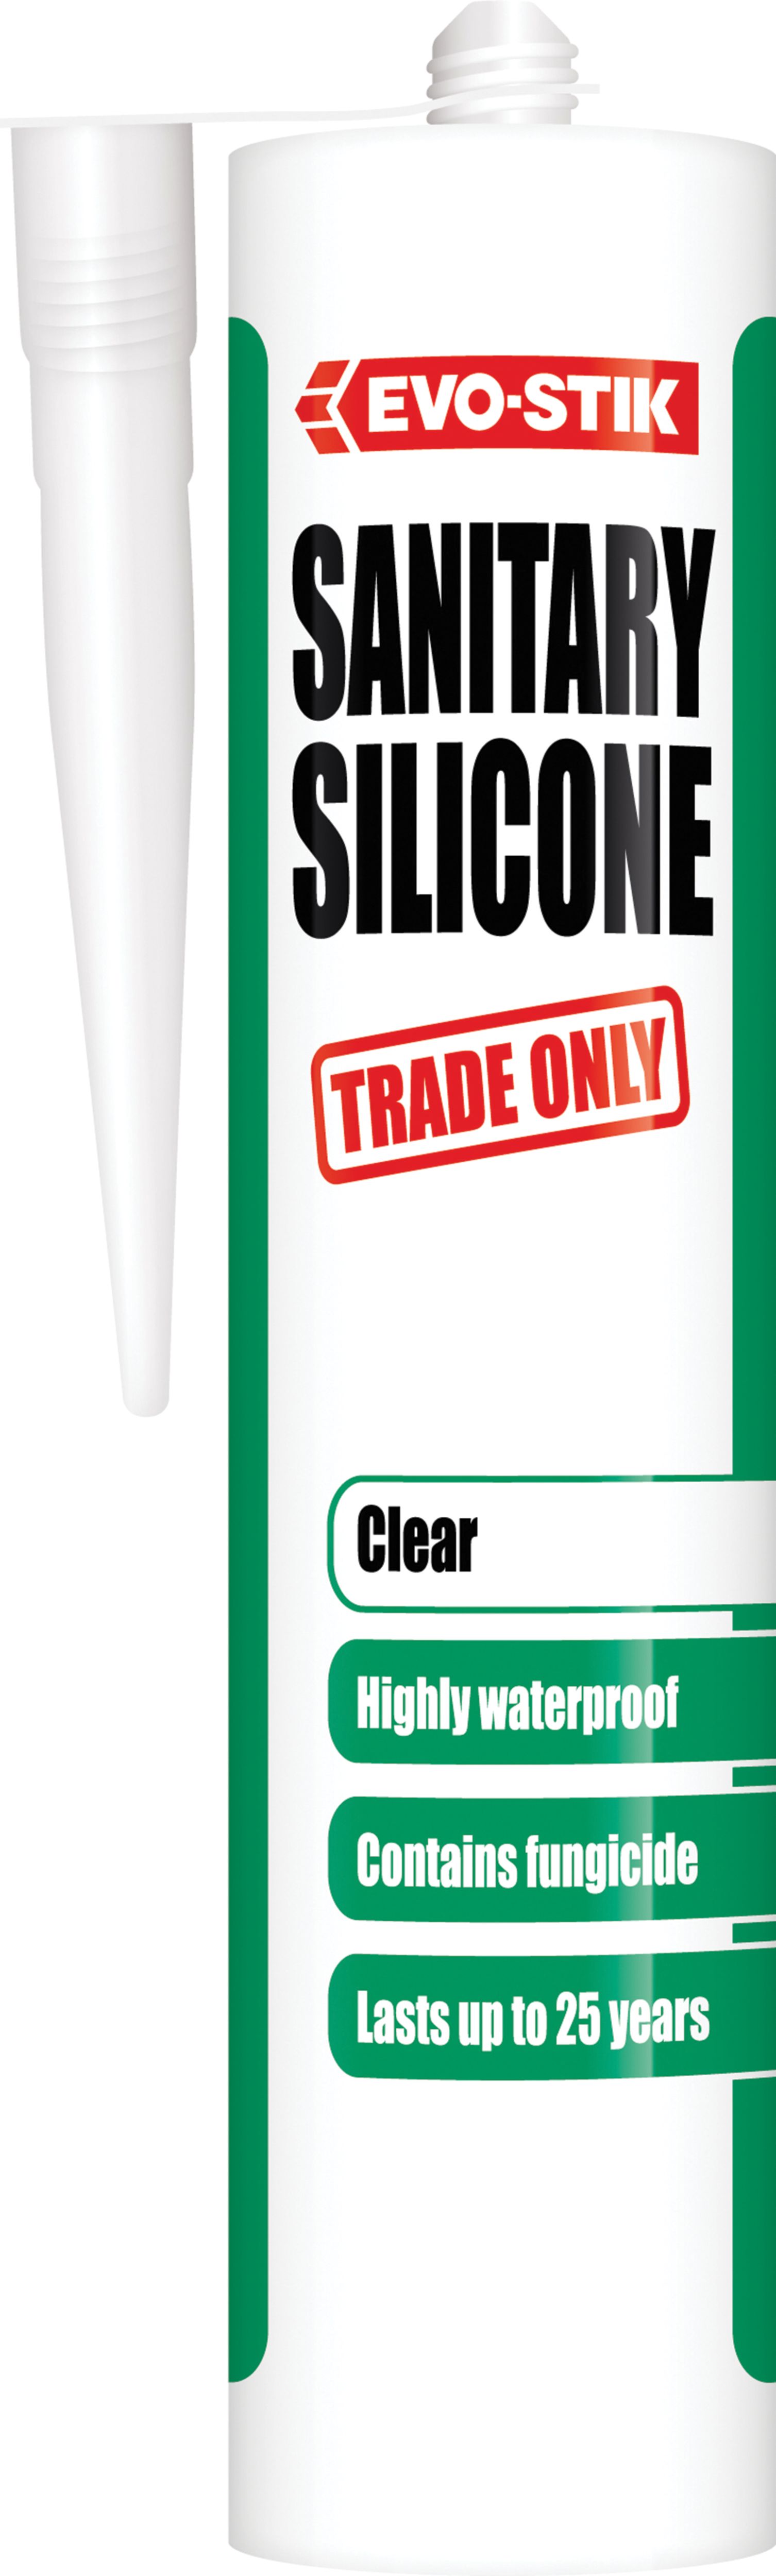 Image of Evo-Stik Trade Only Sanitary Silicone Sealant - Clear - 280ml